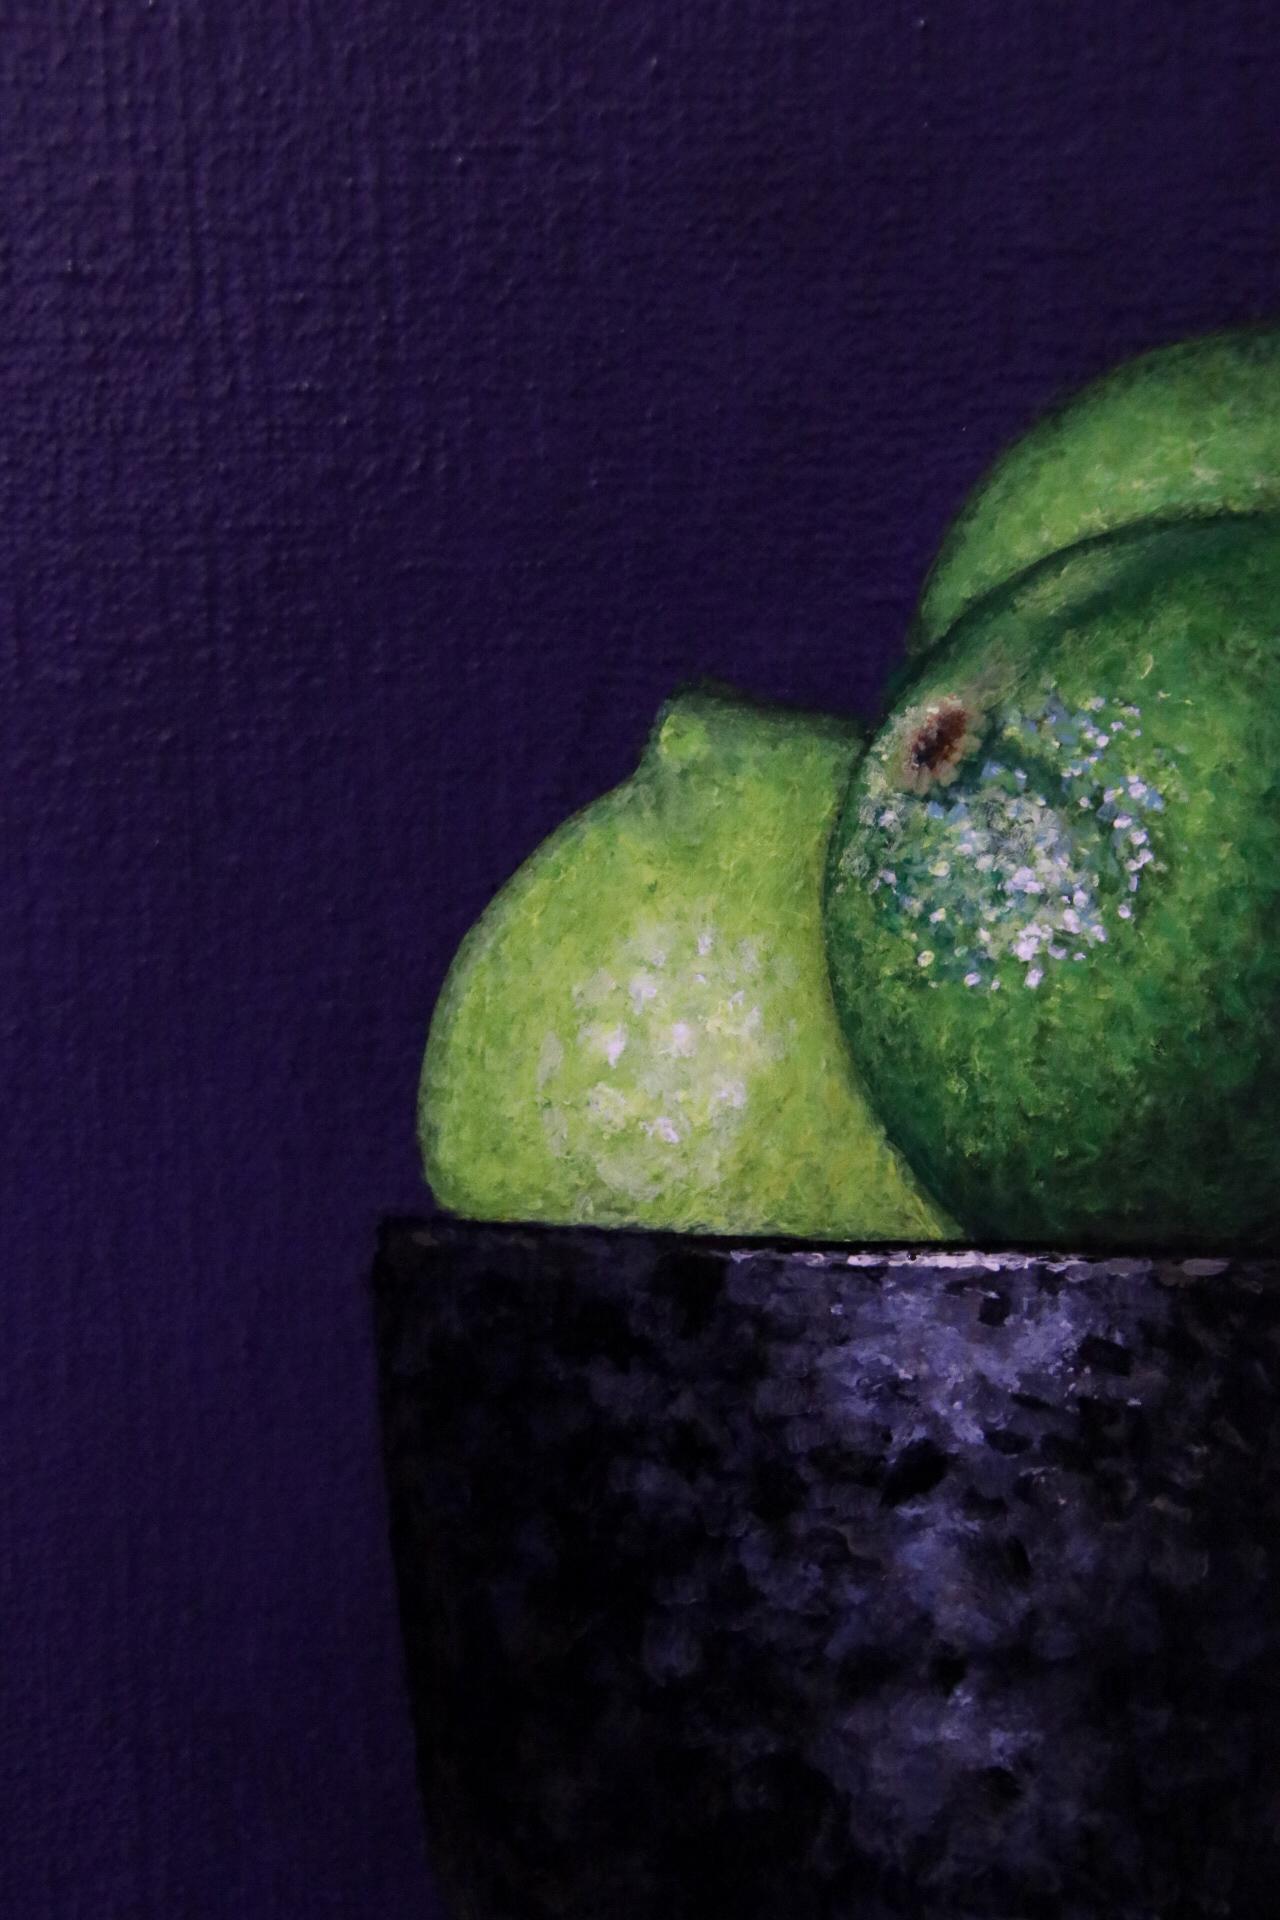 Limes in a black bowl-21st Century Realistic Contemporary Still-life painting  - Black Still-Life Painting by Heidi von Faber